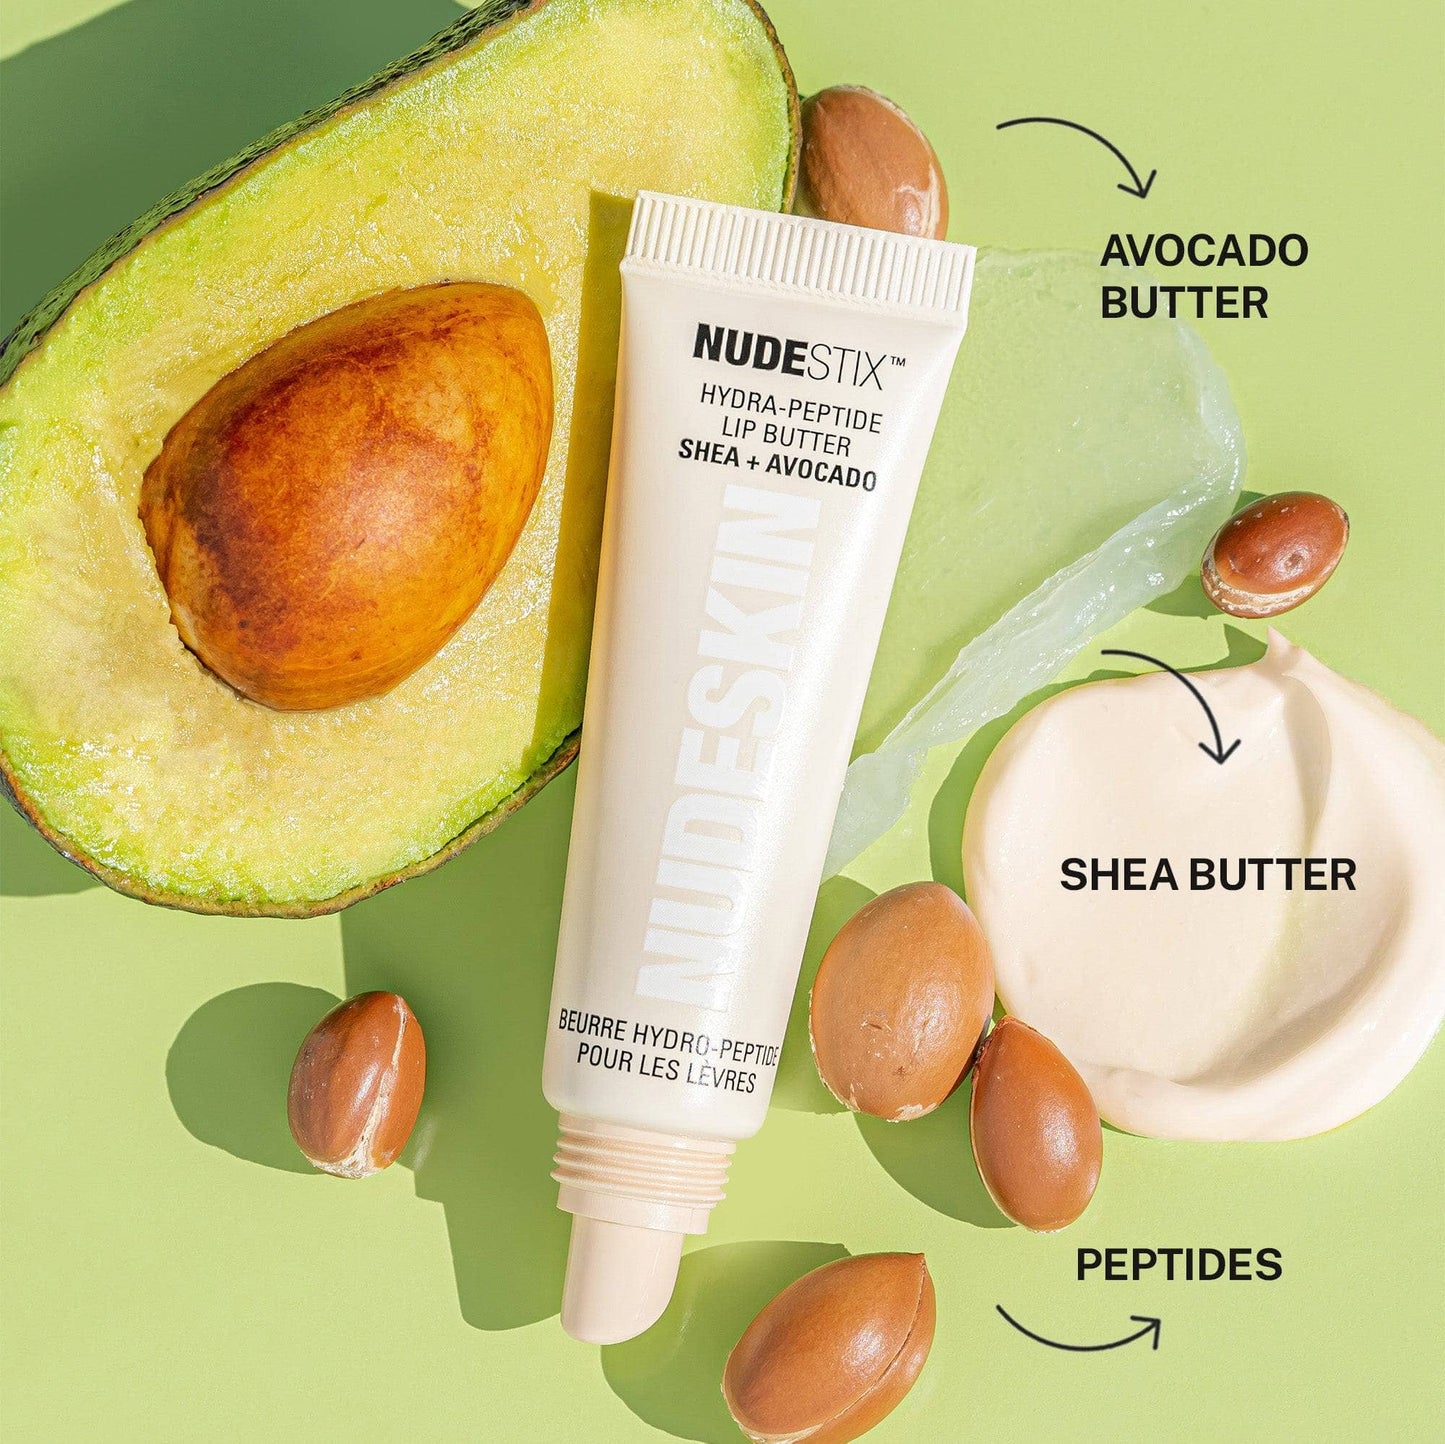 Hydra-Peptide Lip Butter in shade Clear Gloss. Flat lay with avocado and shea butter